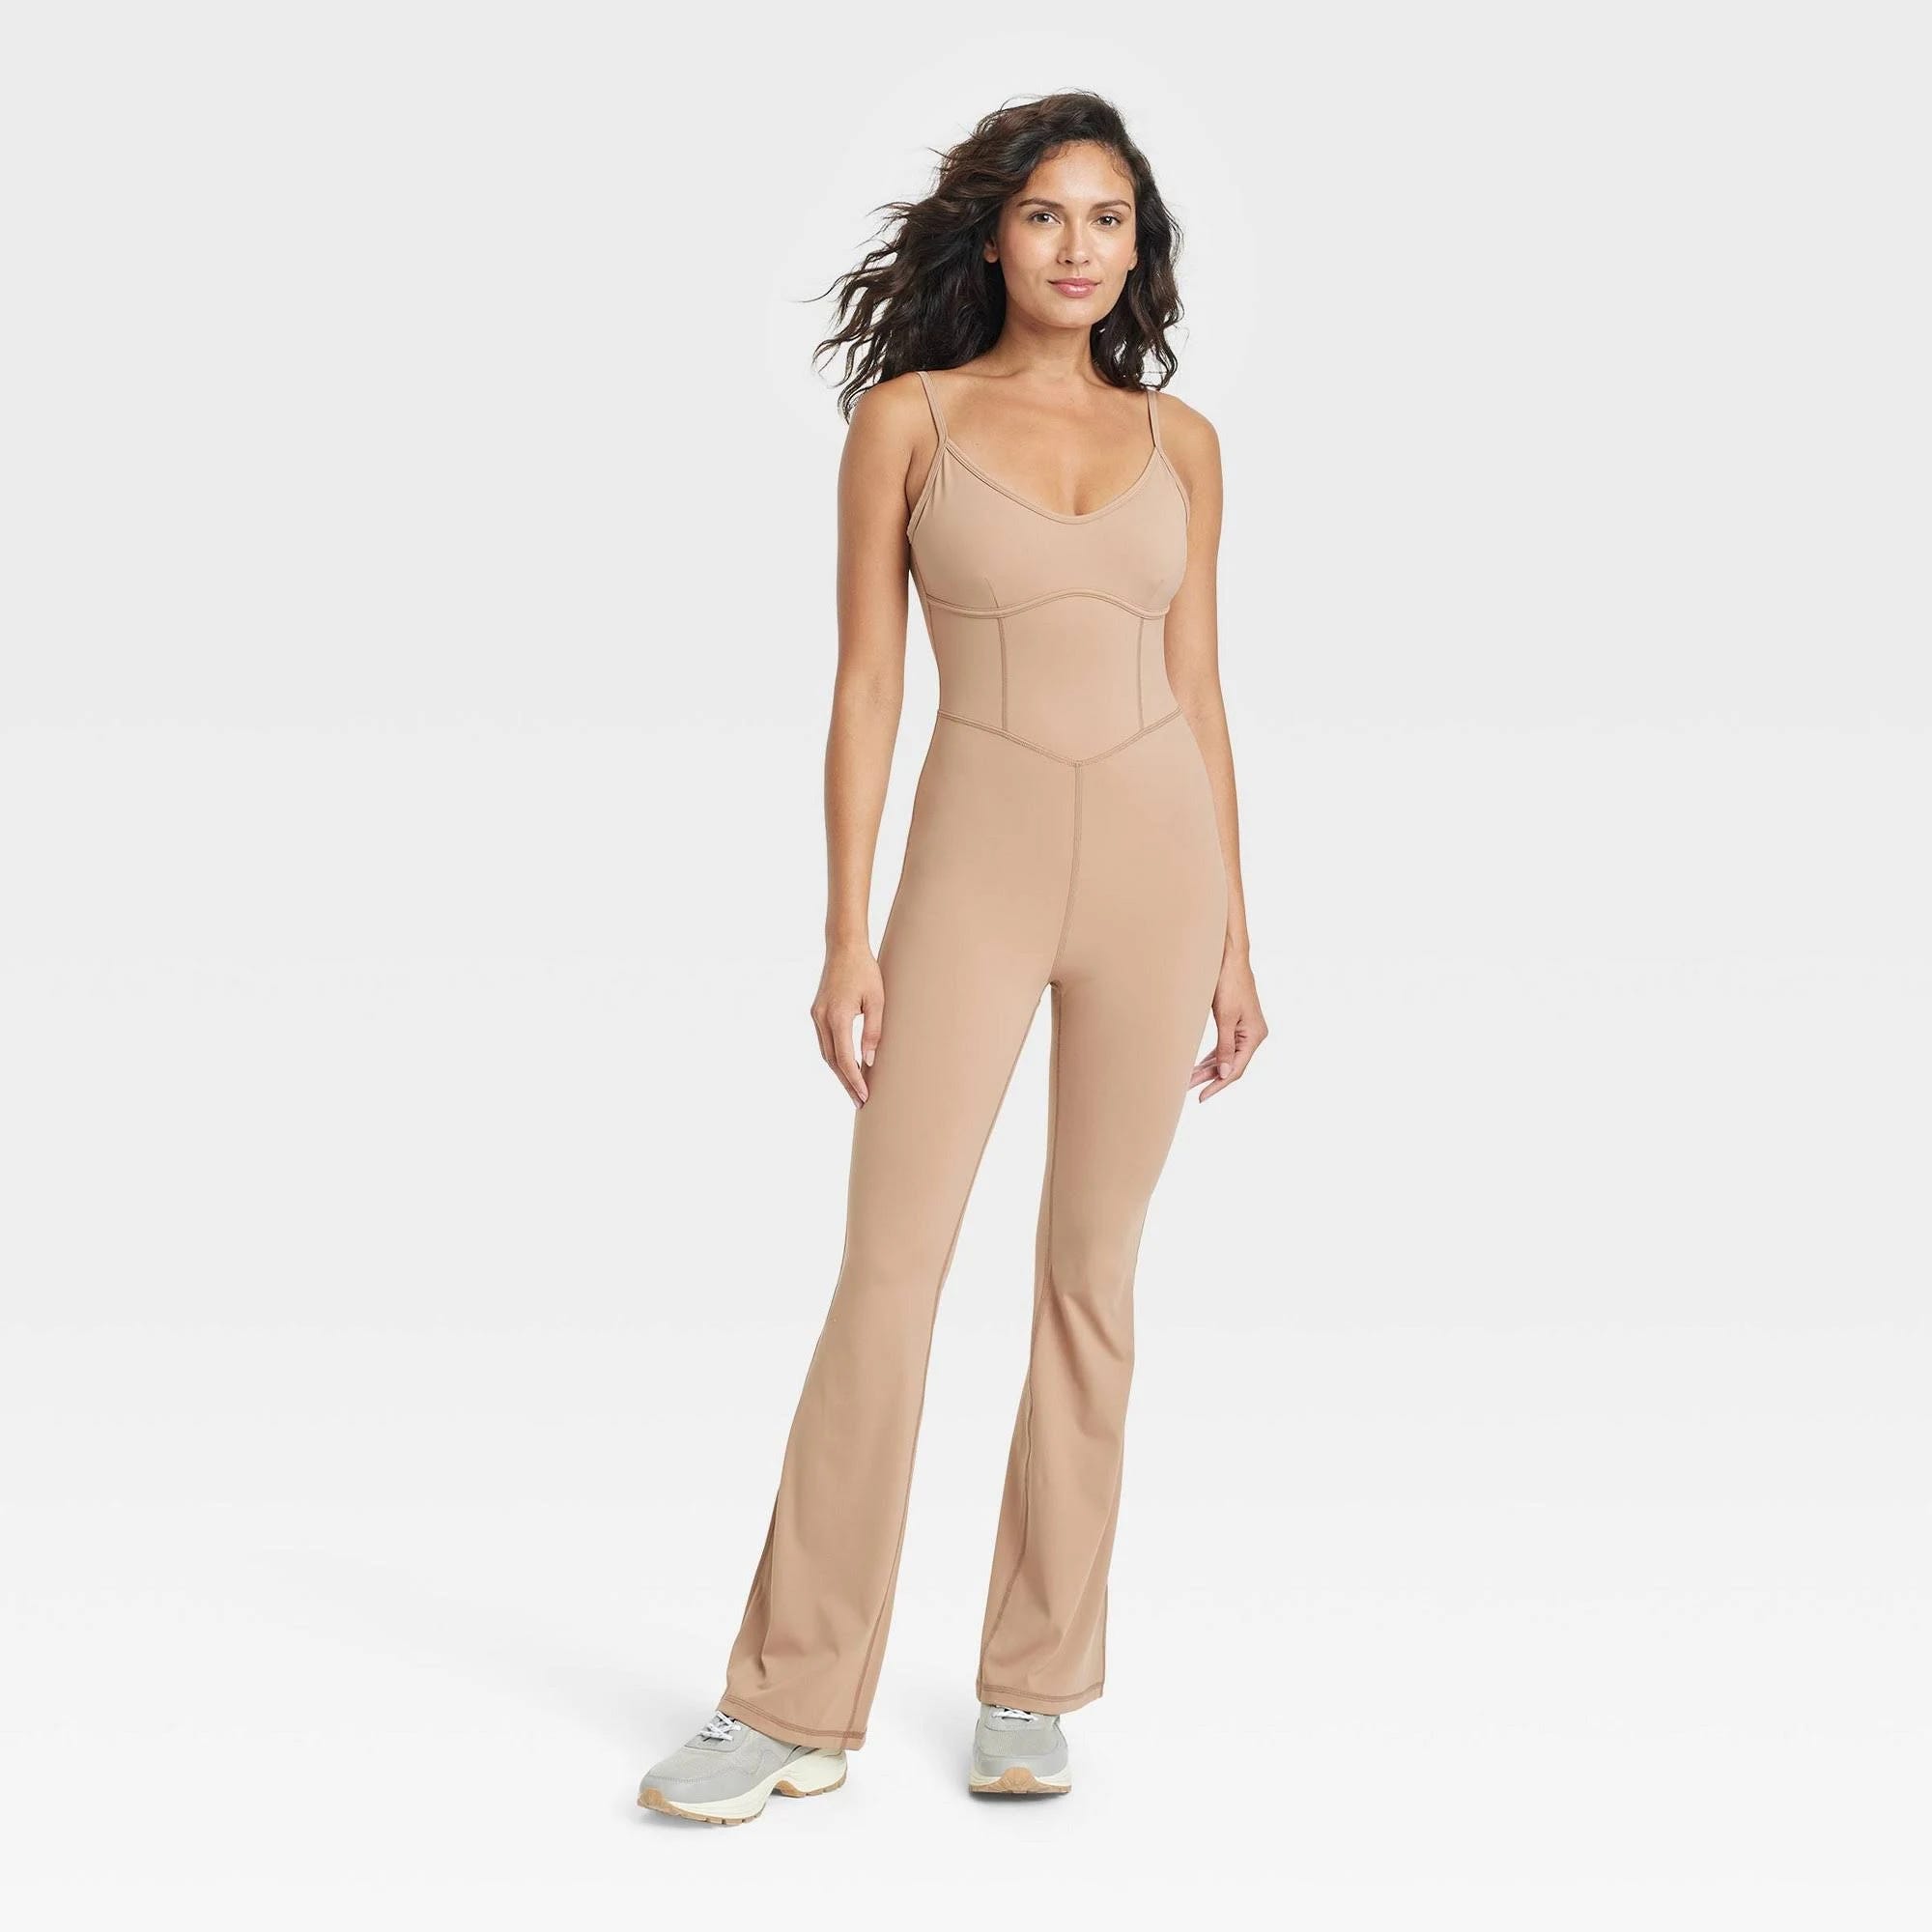 Athletic Long Bodysuit with Scoop Neckline in Light Brown | Image